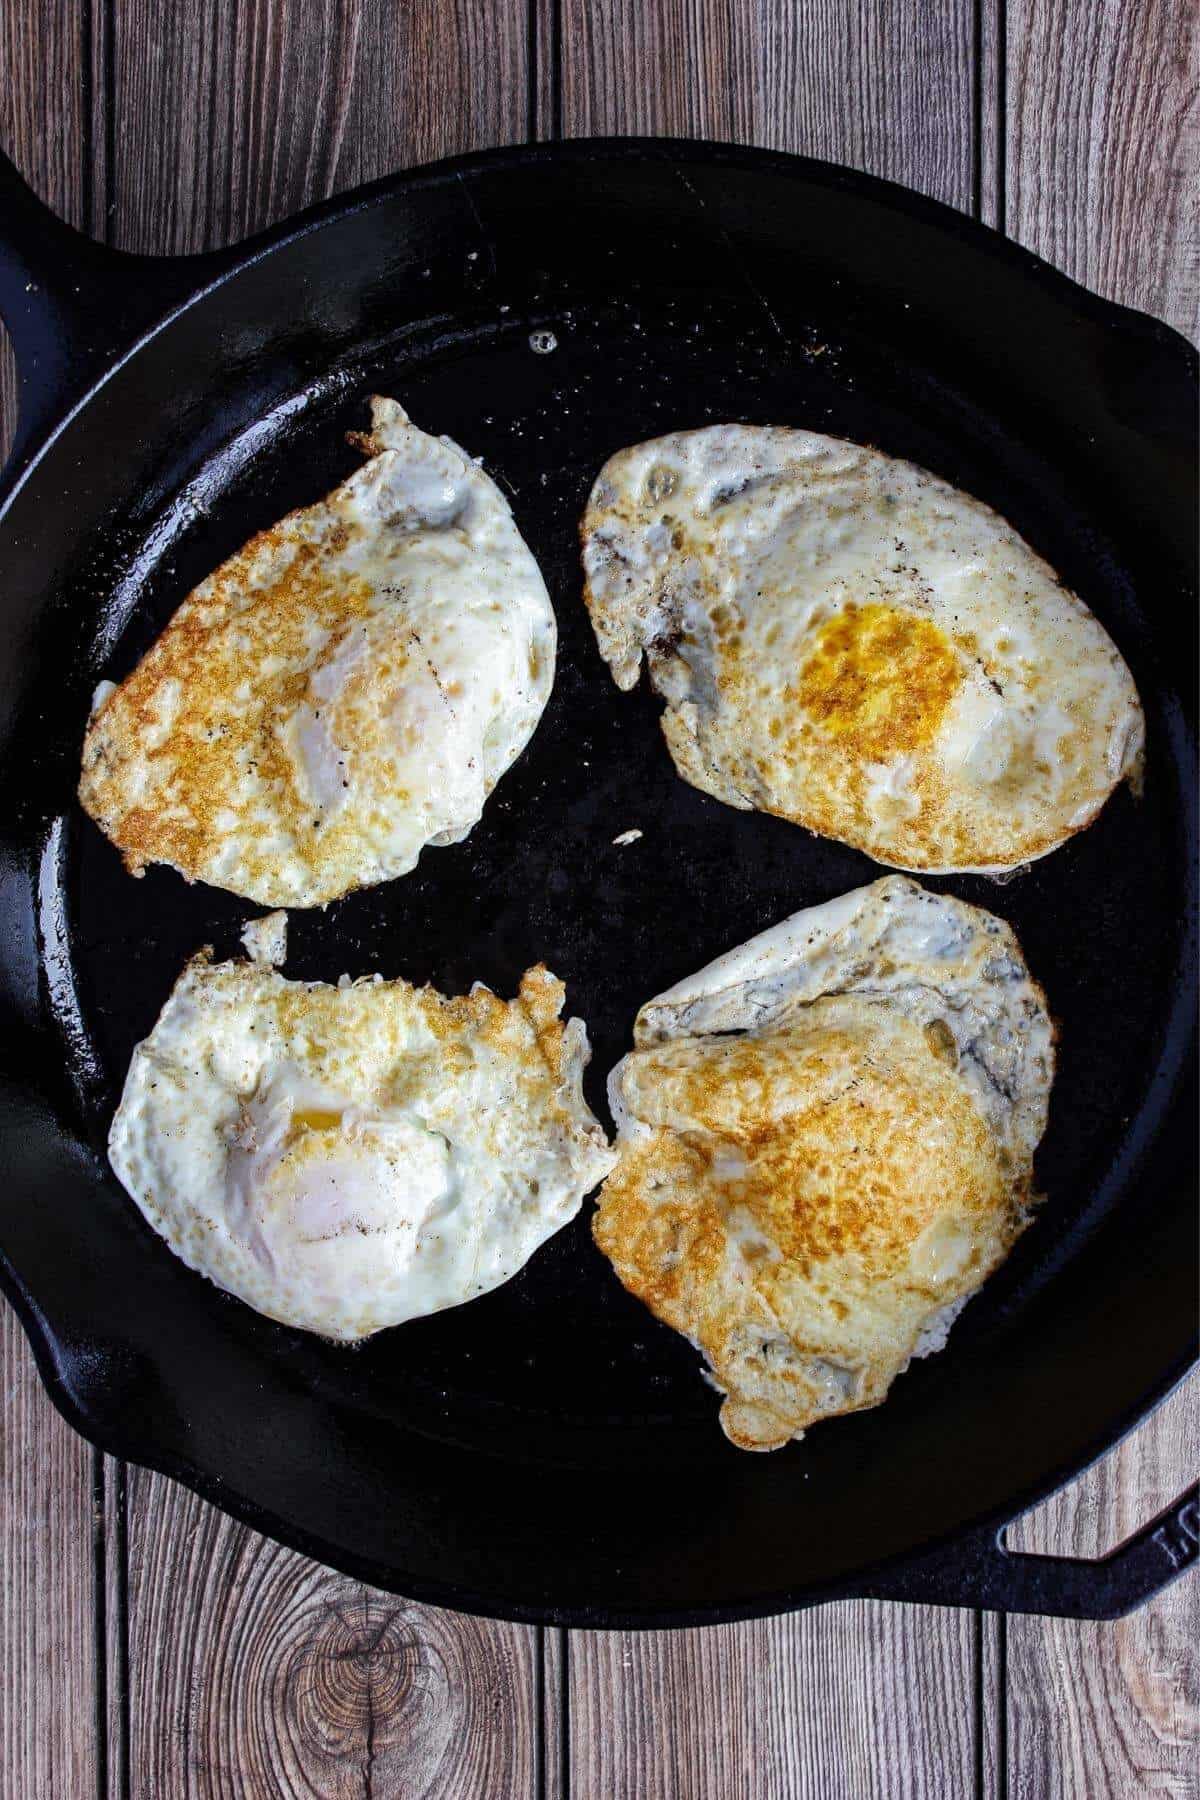 Fried eggs in a skillet.